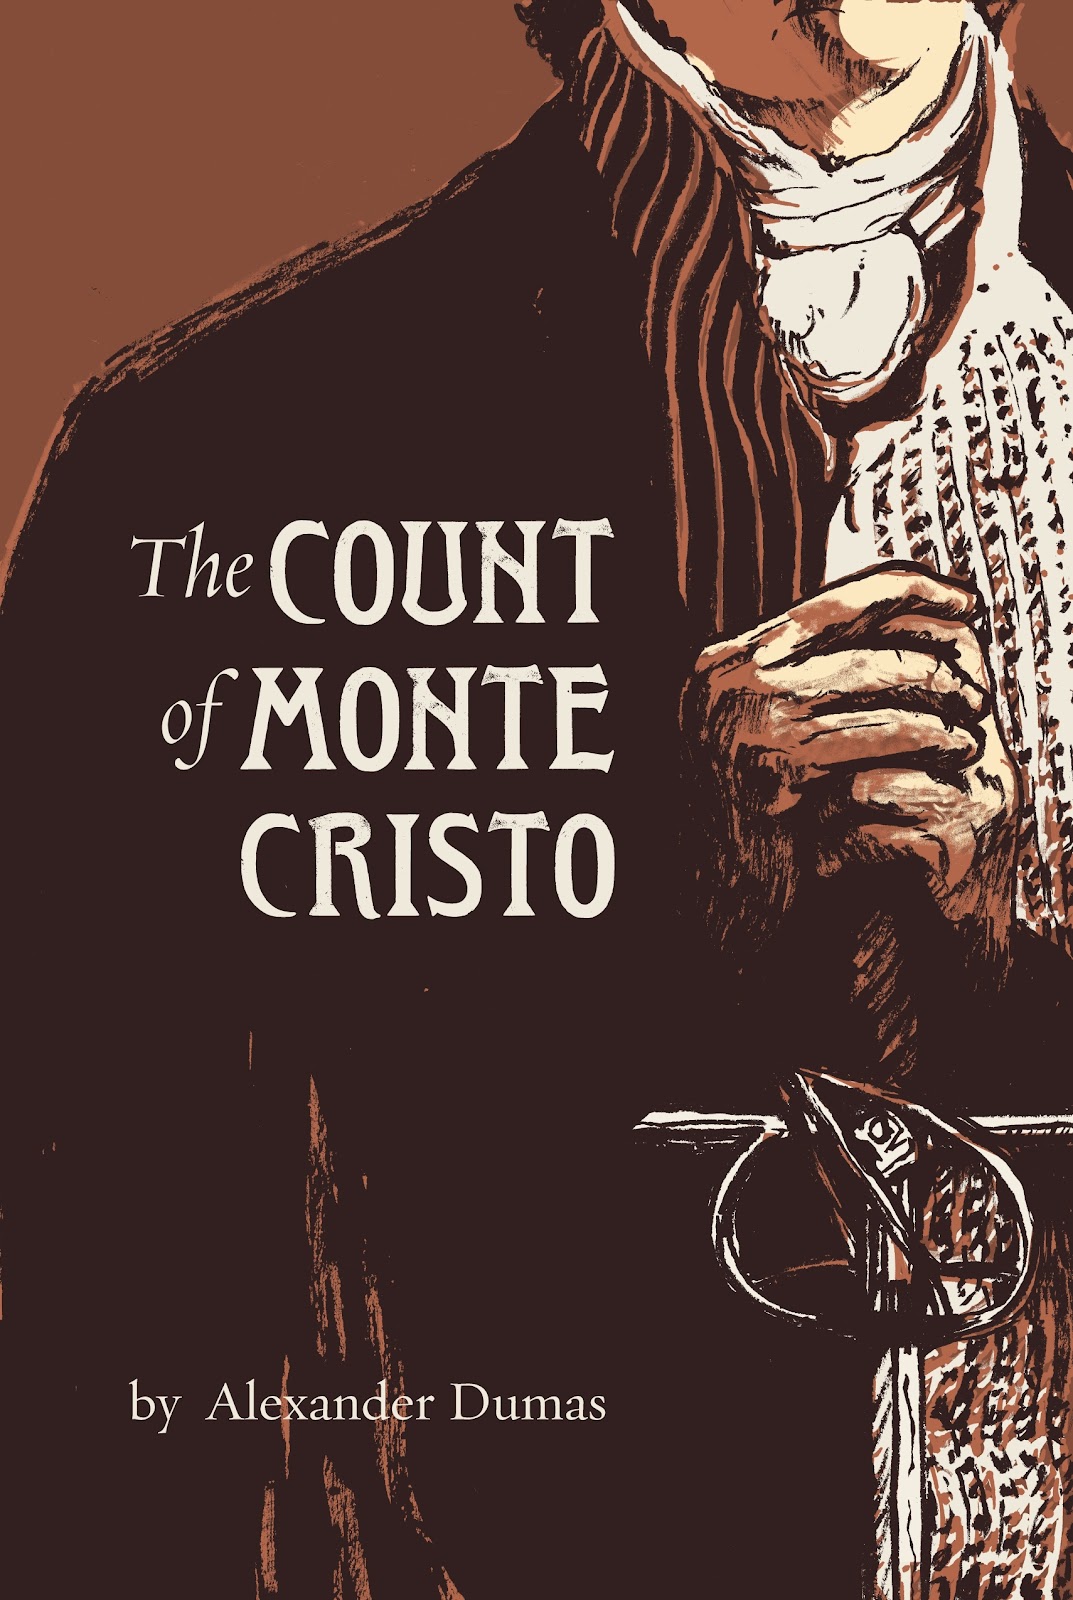 The Count of Monte Cristo by Alexander Dumas Book Cover